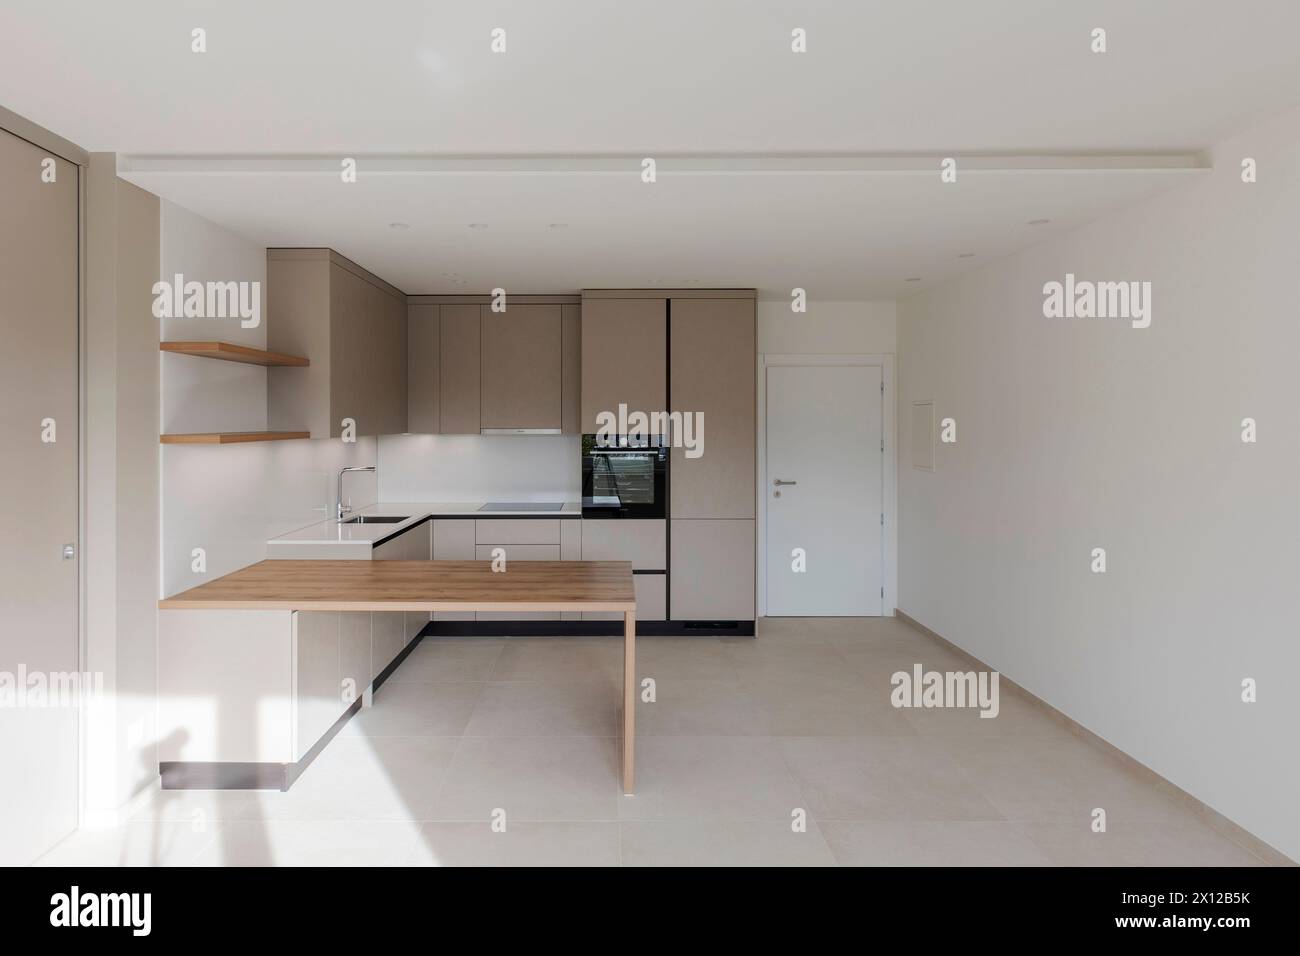 Front view of a new kitchen with a sturdy wooden table in front. Very large space or room with white walls. Stock Photo